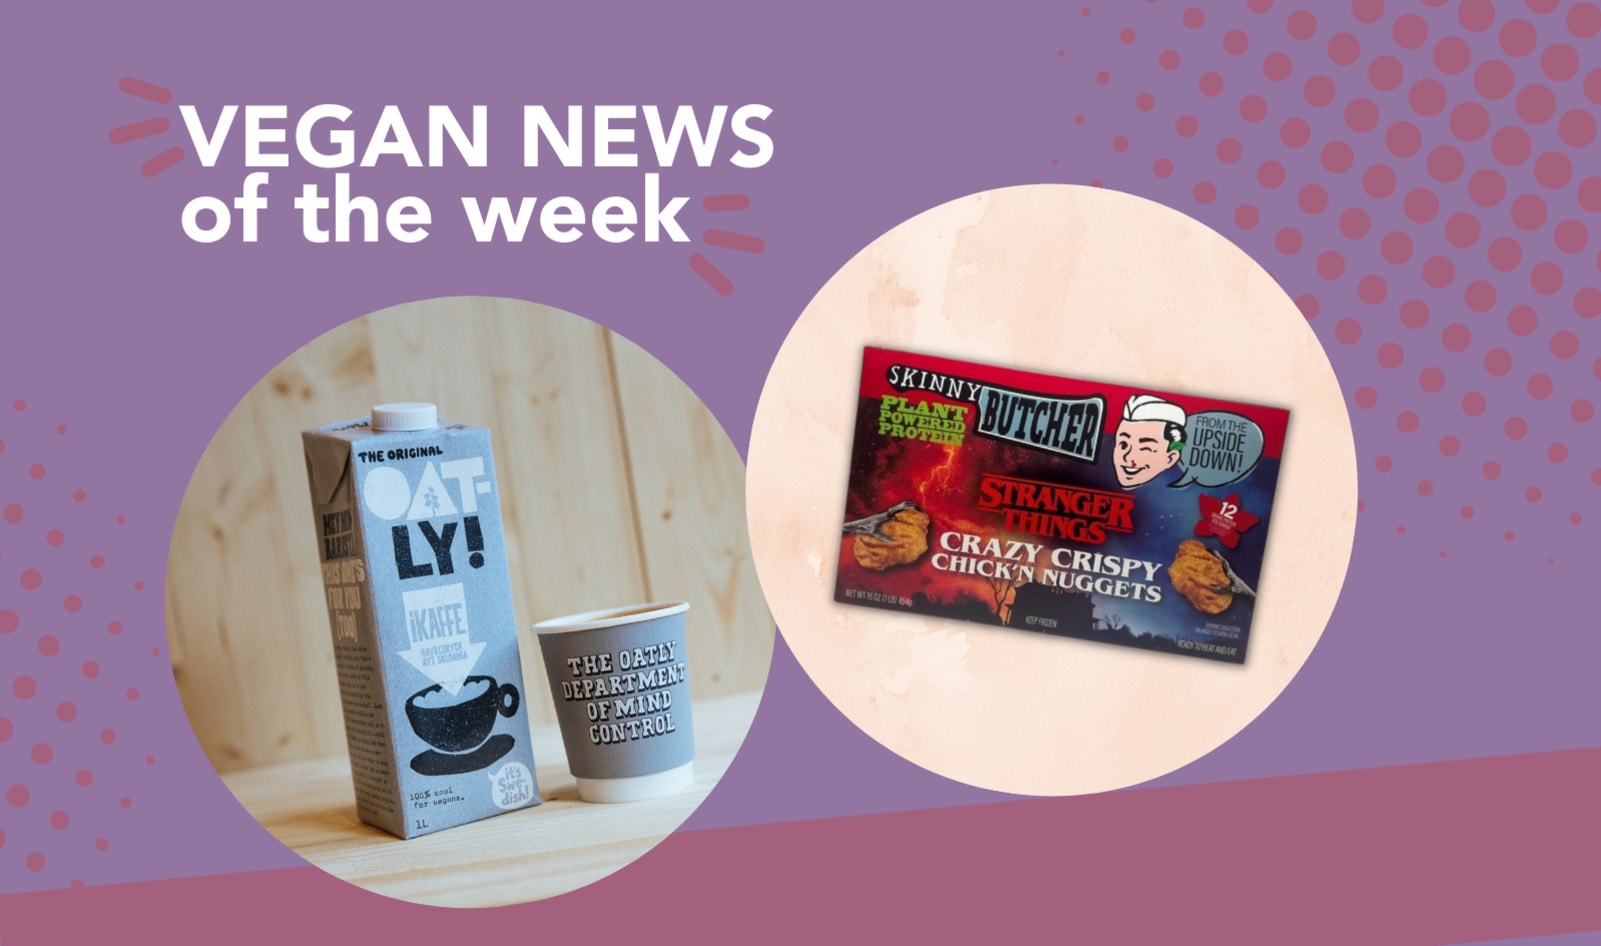 Oatly on Demand, Stranger Things Nuggets, and More Vegan Food News of the Week